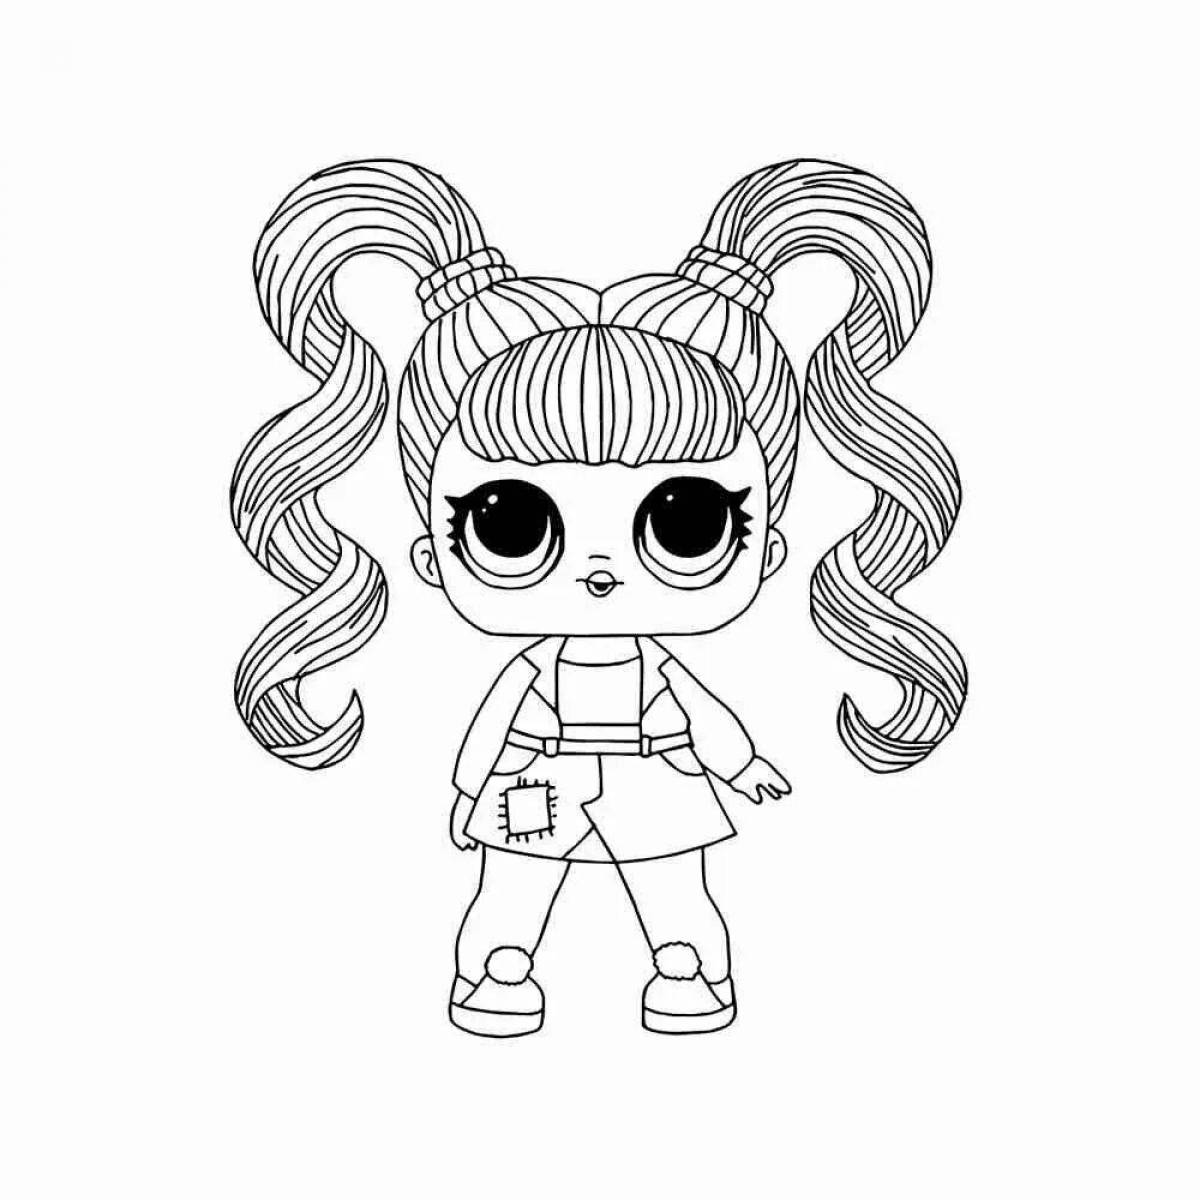 Fun coloring lol with pigtails